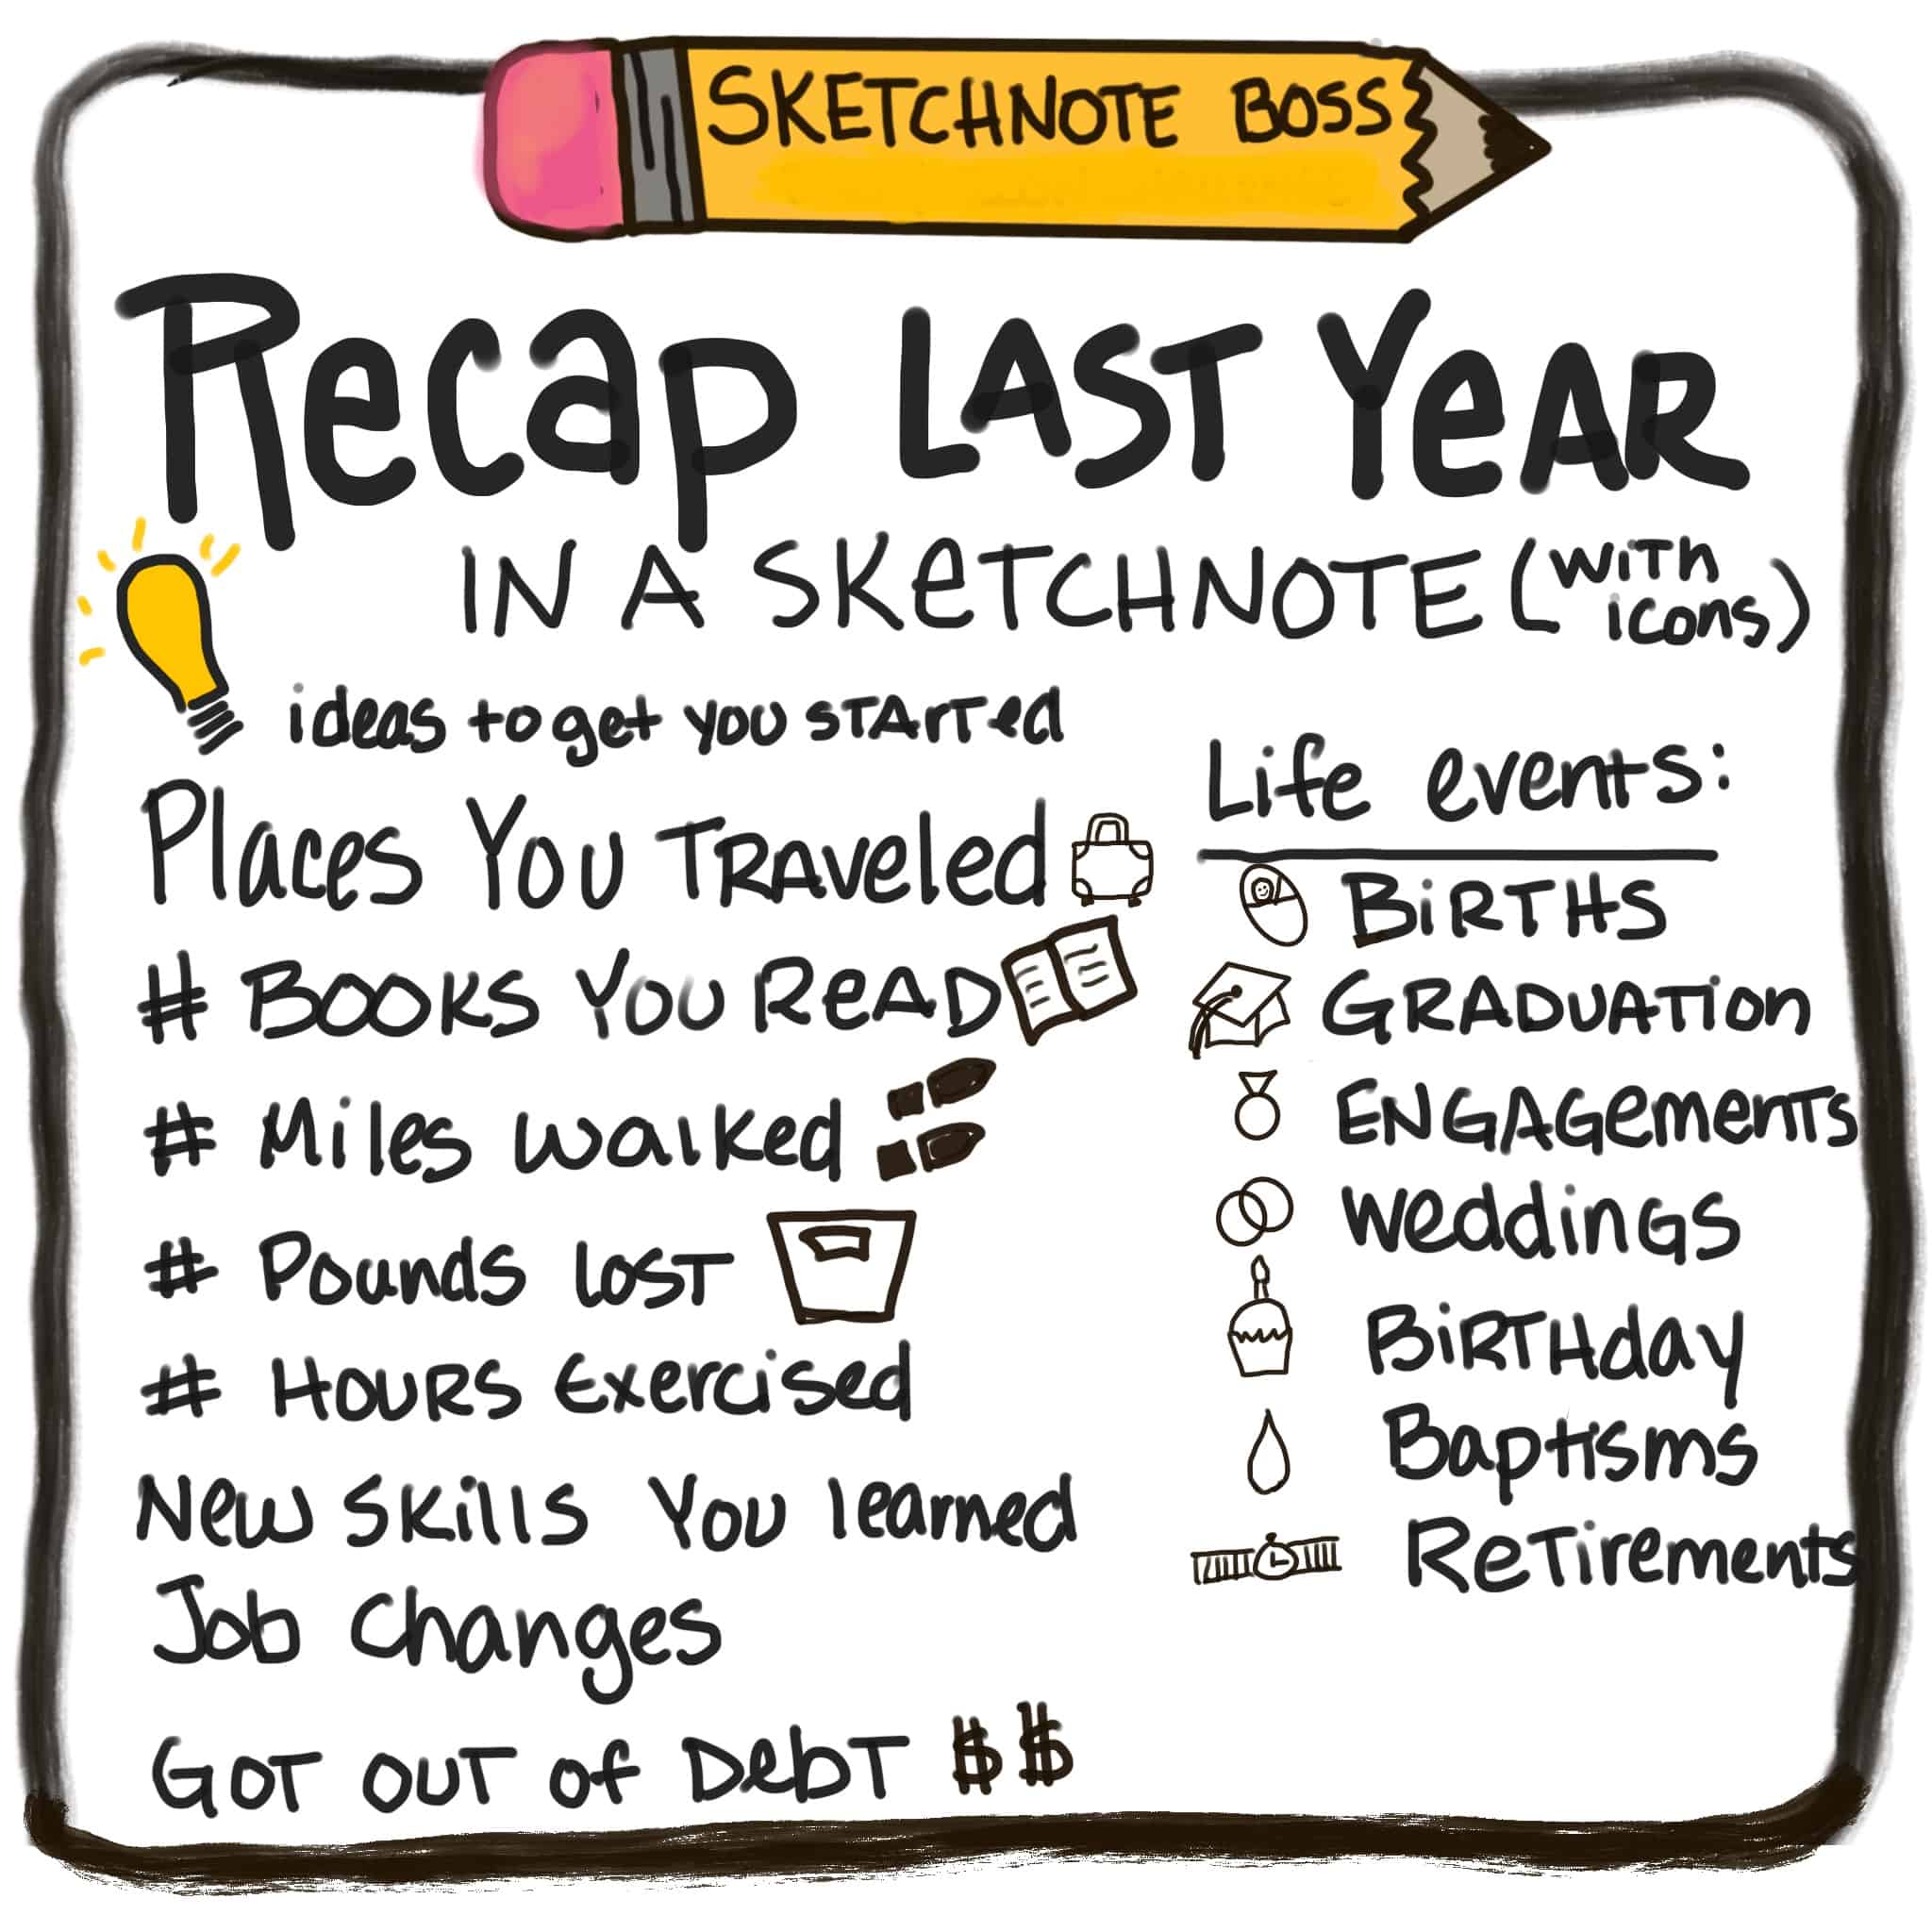 Recap your year with a Sketchnote